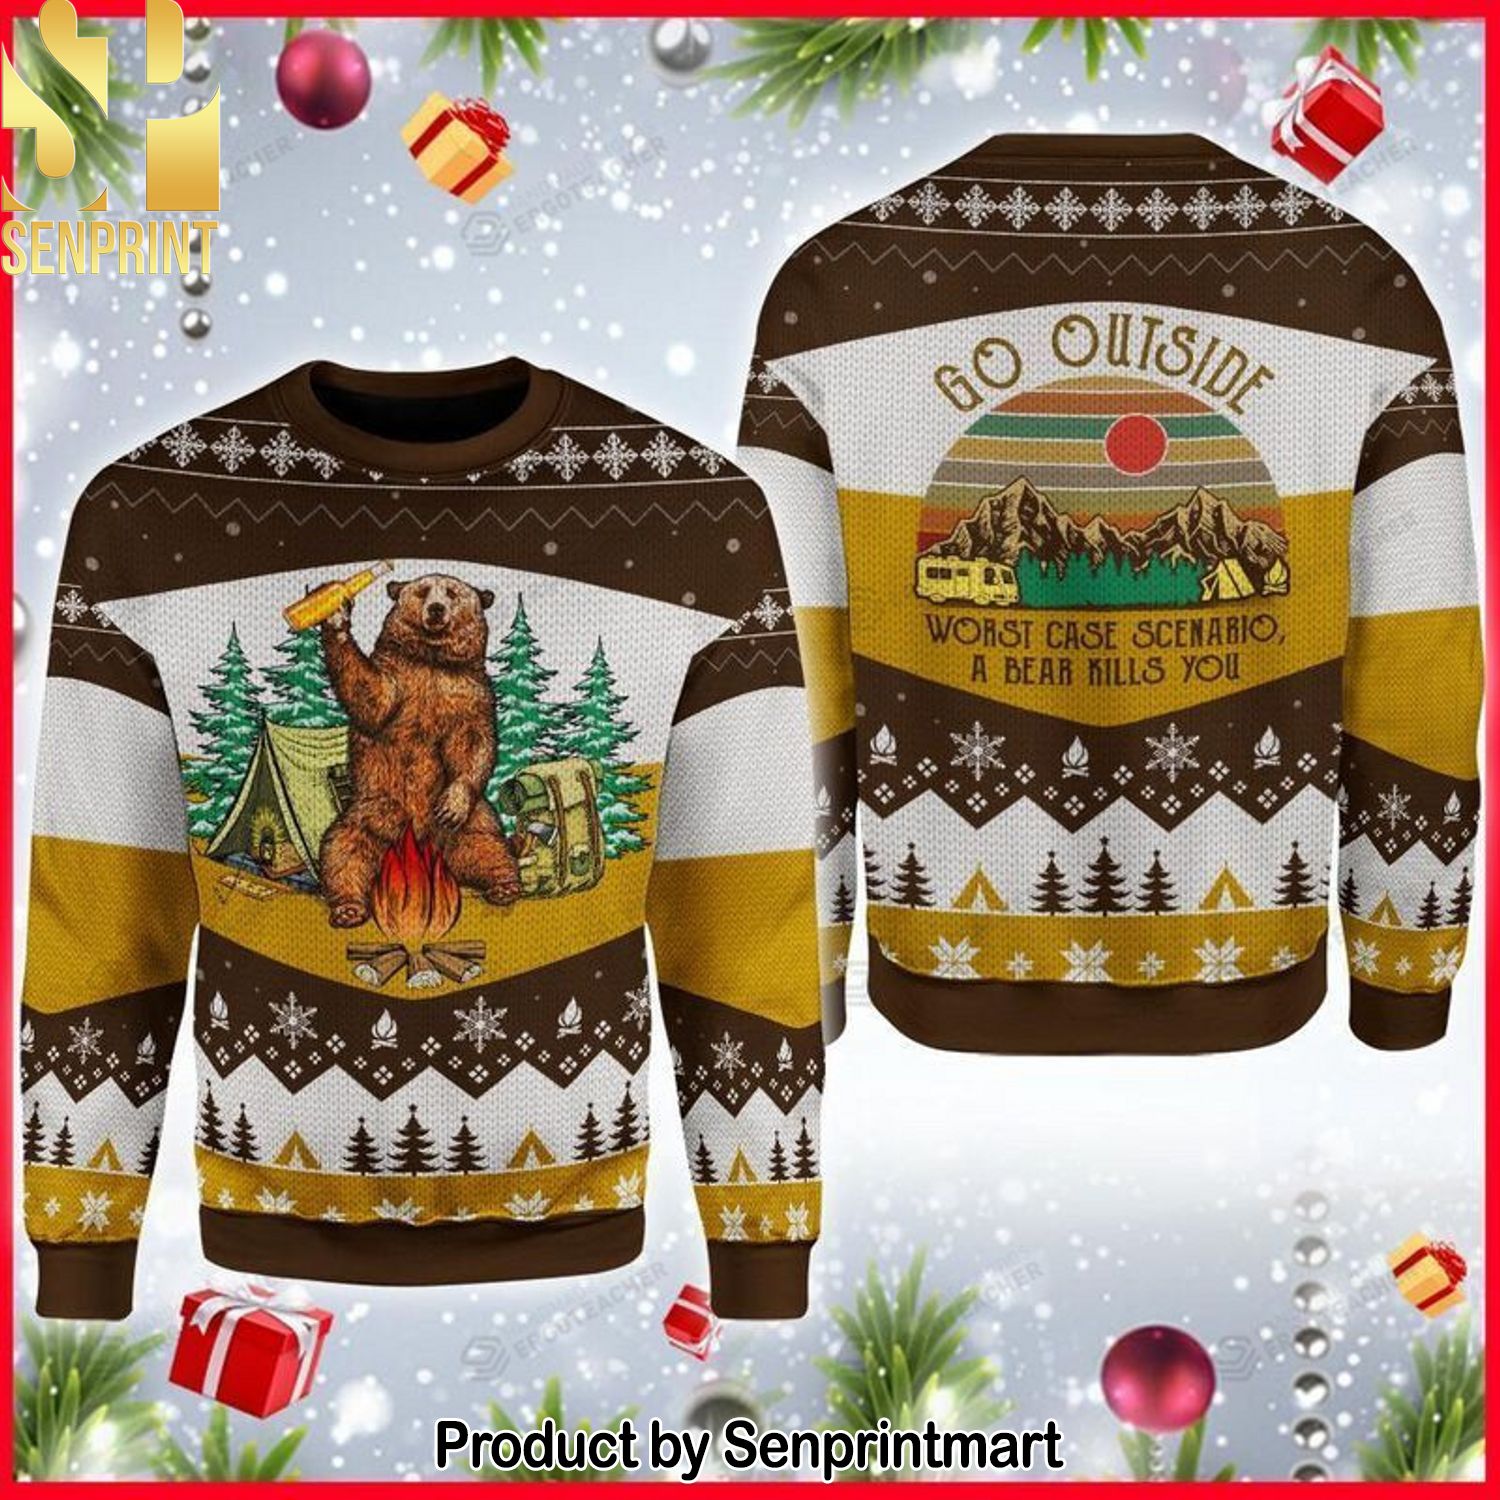 Camping Go Outside Worst Case Scenario A Bear Kills You For Christmas Gifts 3D Printed Ugly Christmas Sweater